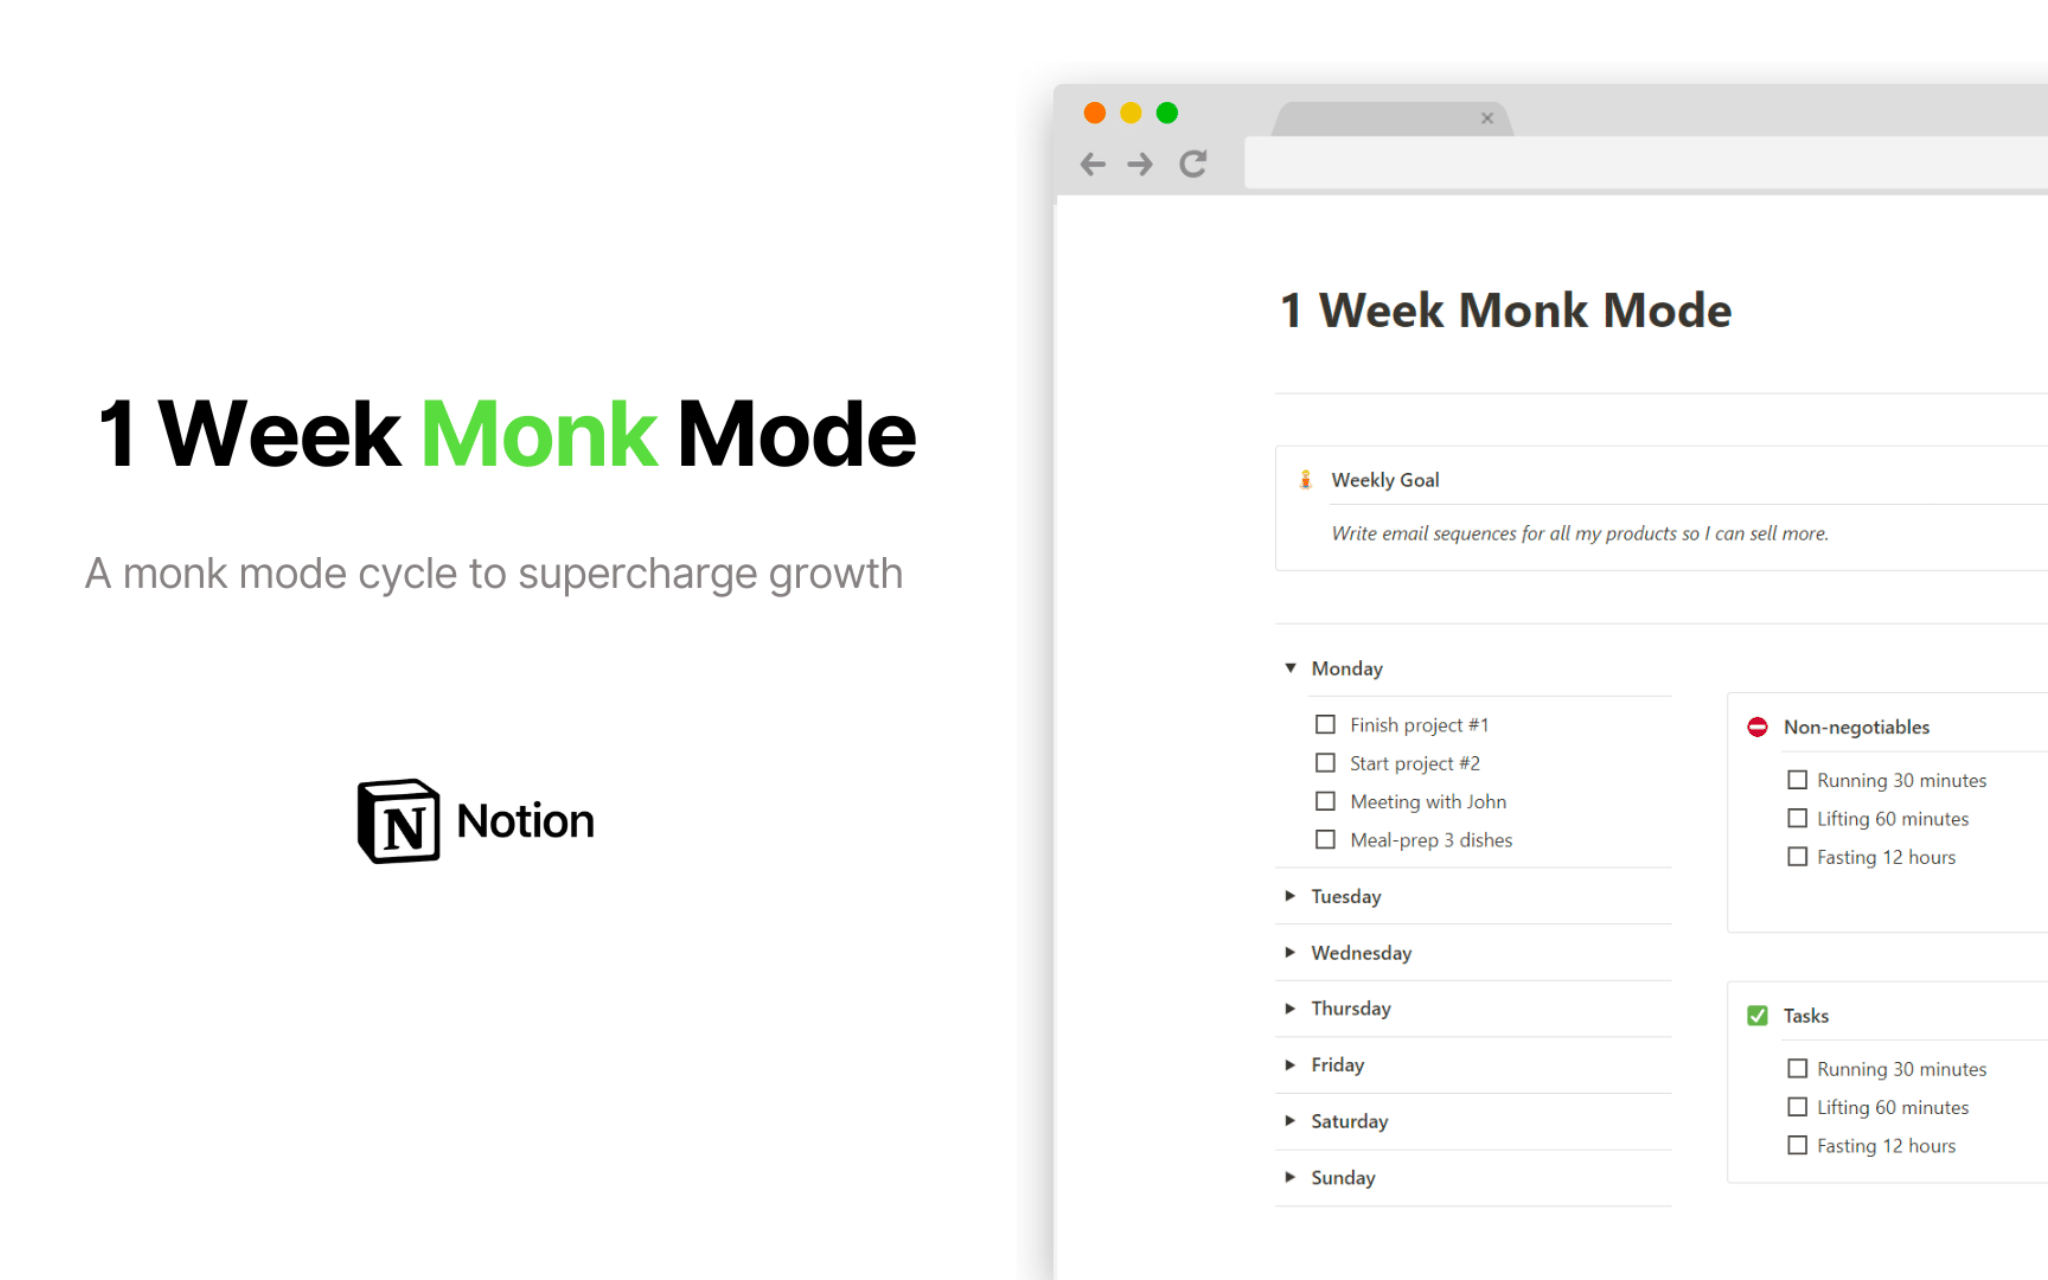 Supercharge your growth with Monk Mode
